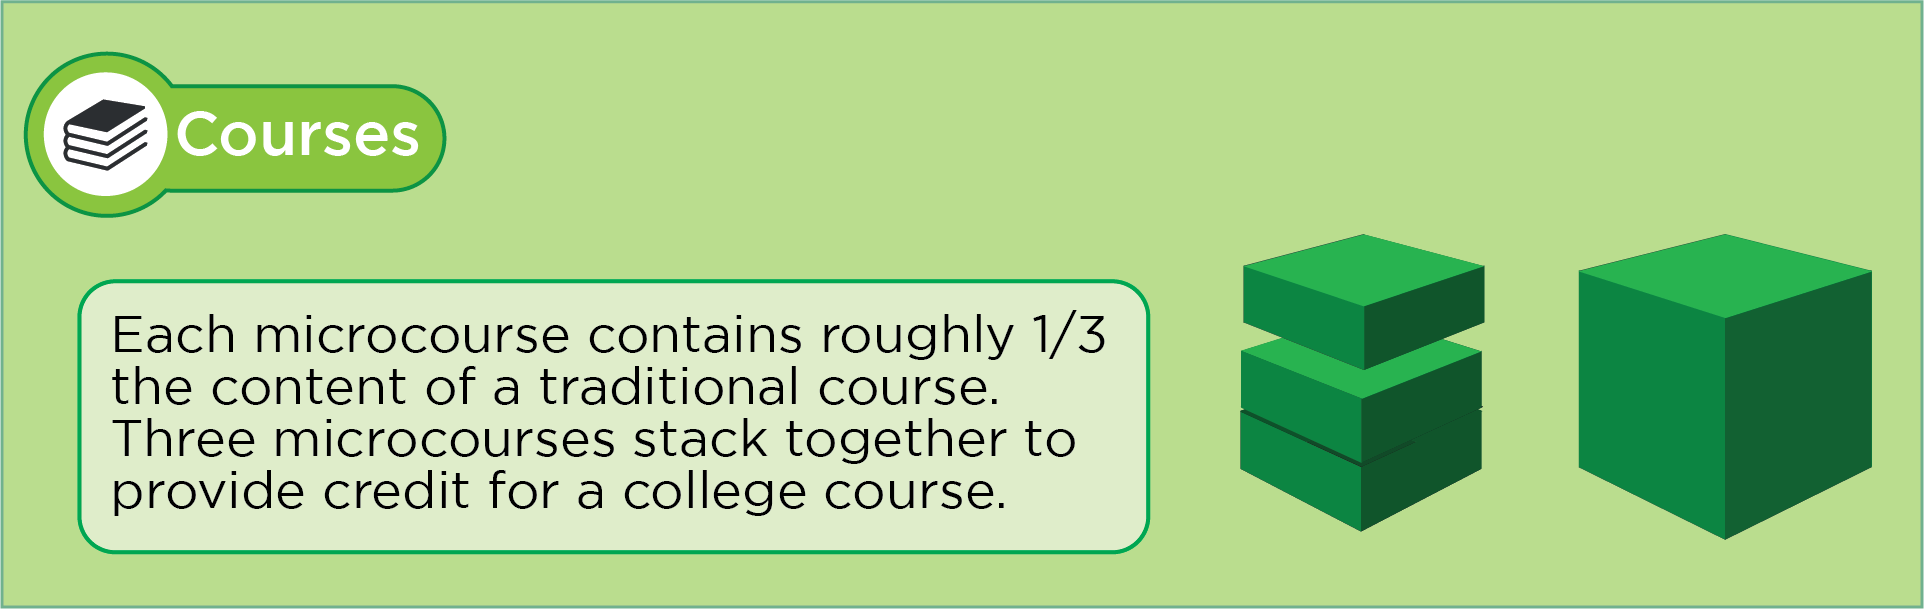 Each microcourse contains roughly 1 third the ontent of a traditonal course. 3 microcourses stack together to provide credit for a college course.